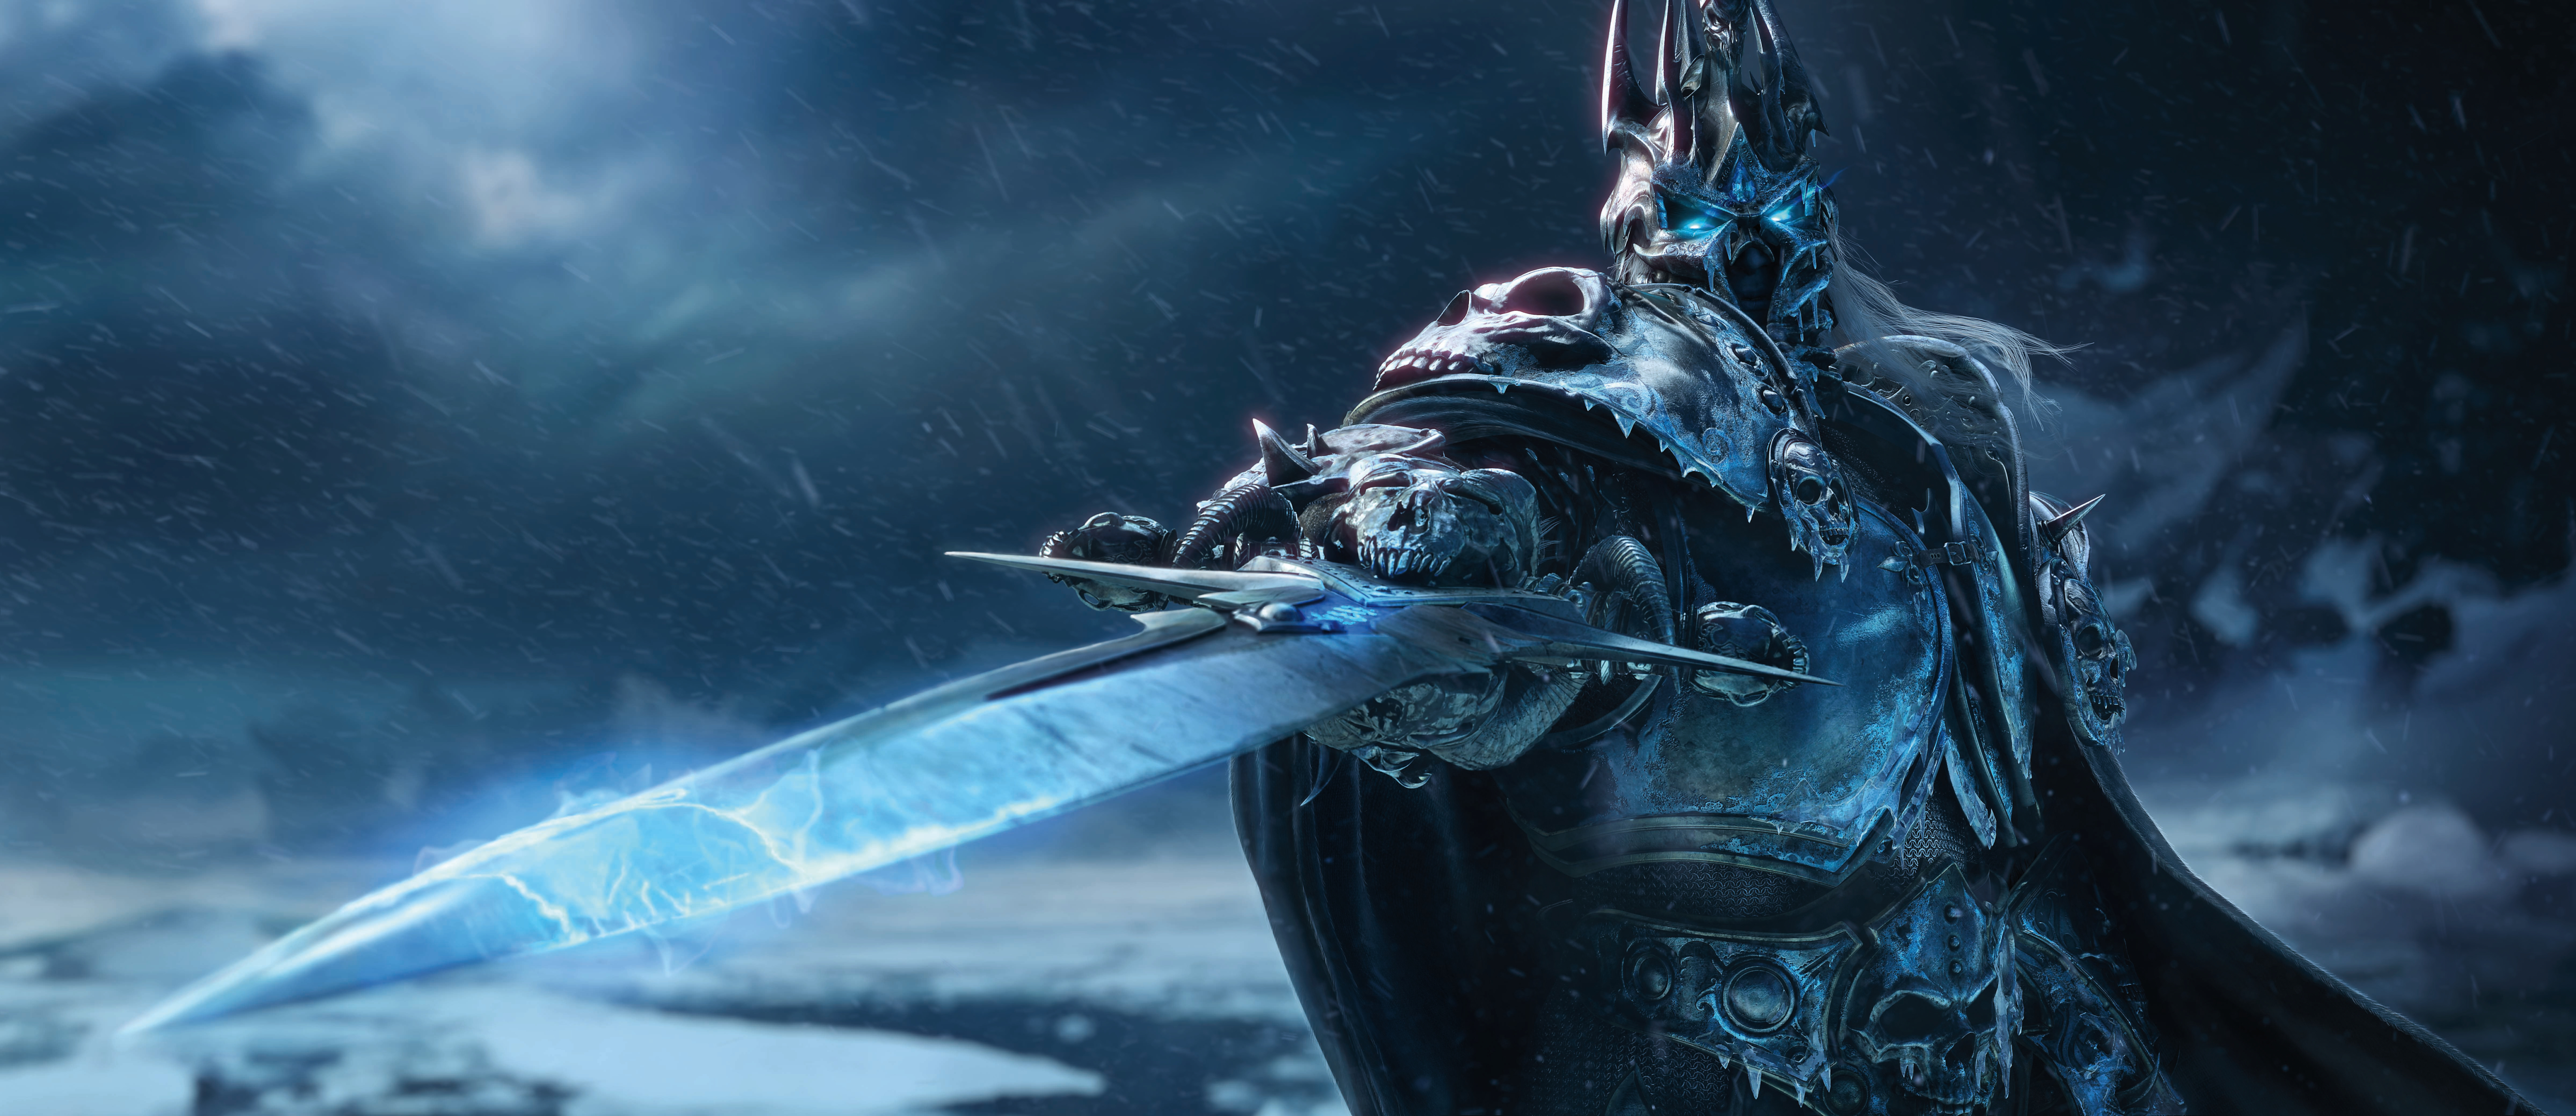 Video Game World Of Warcraft: Wrath Of The Lich King 4k Ultra HD Wallpaper